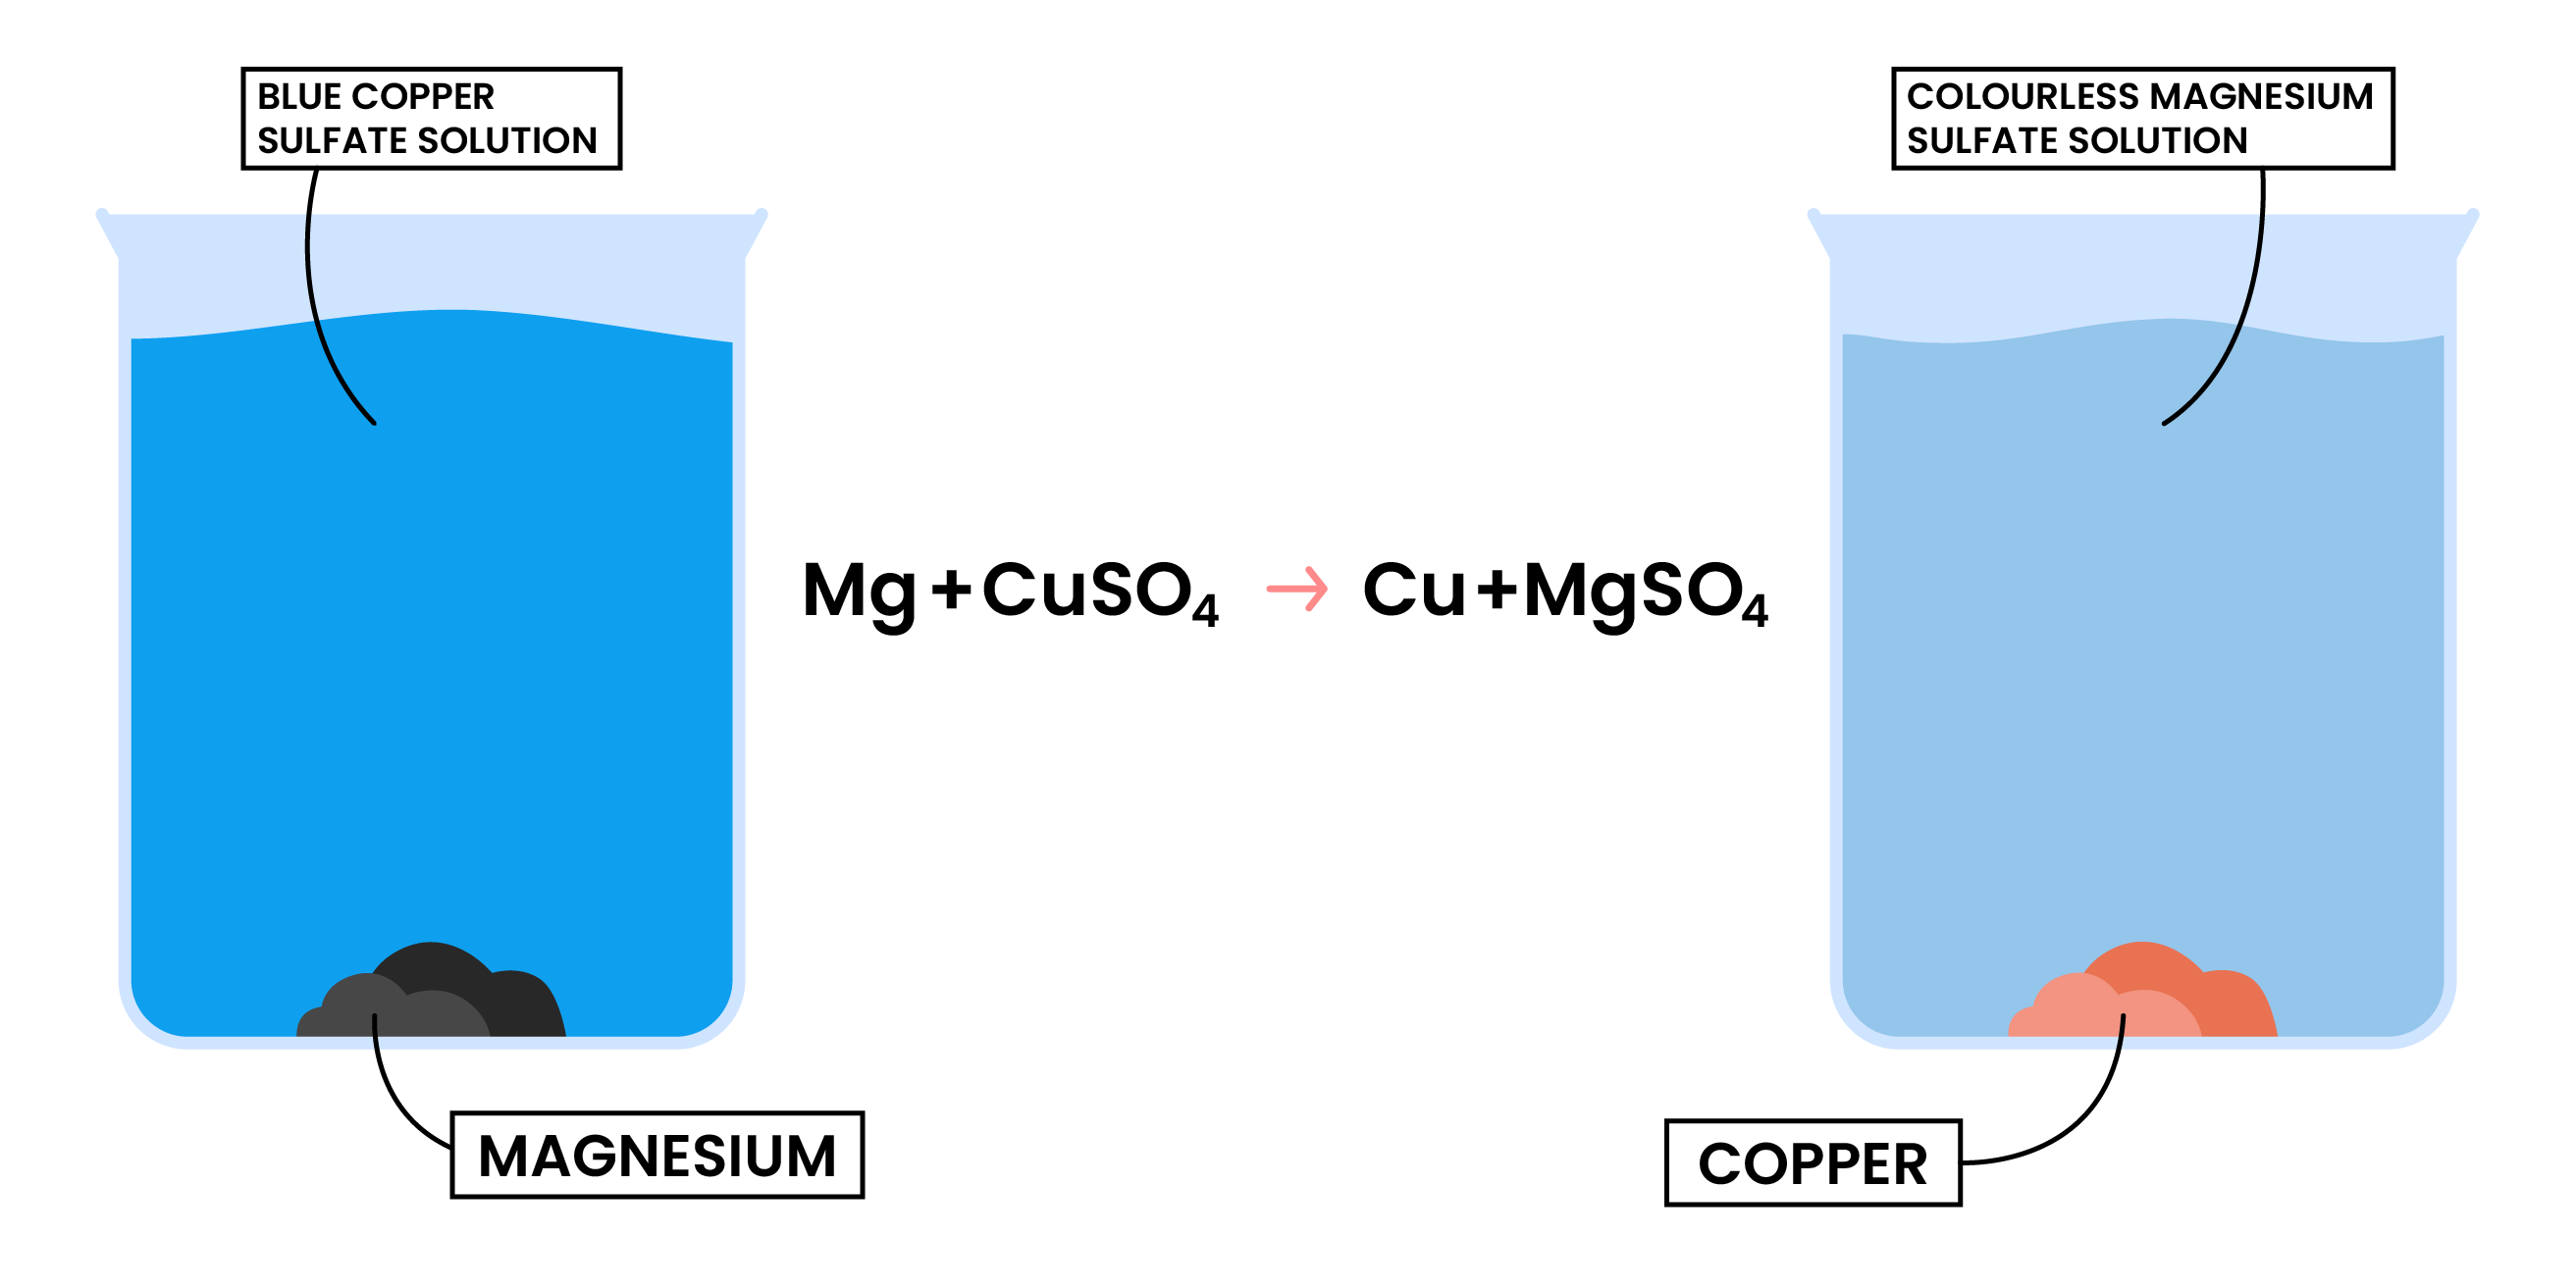 edexcel_igcse_chemistry_topic 13_reactivity series_001_metal displacement reaction copper and magnesium